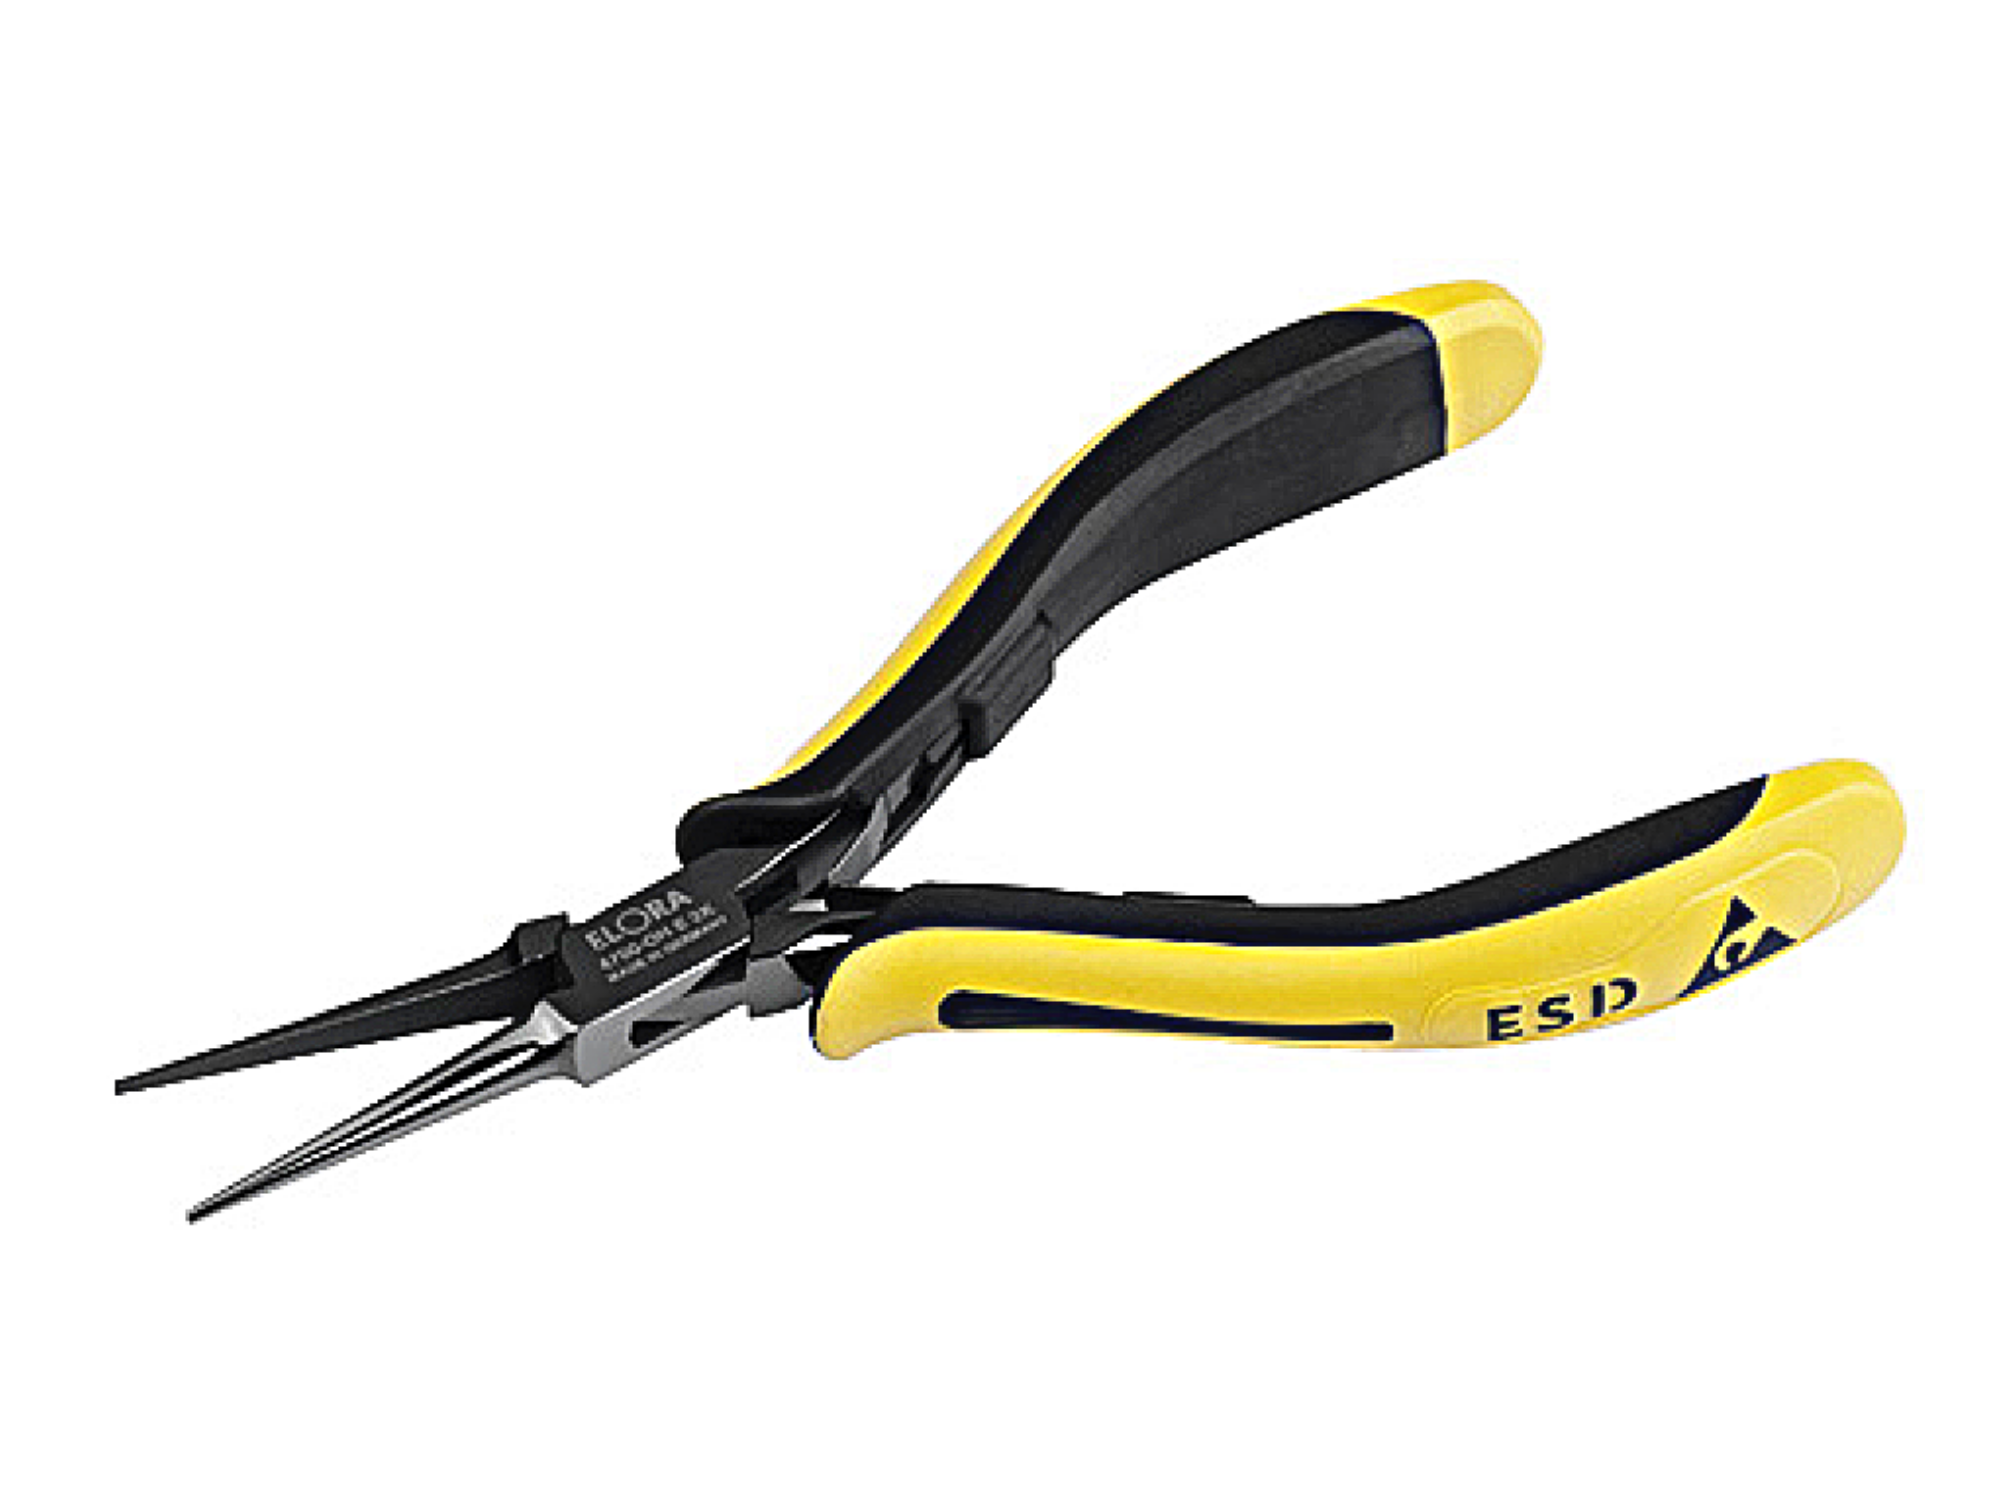 ELORA 4700 Electronic Snipe Nose Plier ESD (ELORA Tools) - Premium Snipe Nose from ELORA - Shop now at Yew Aik.